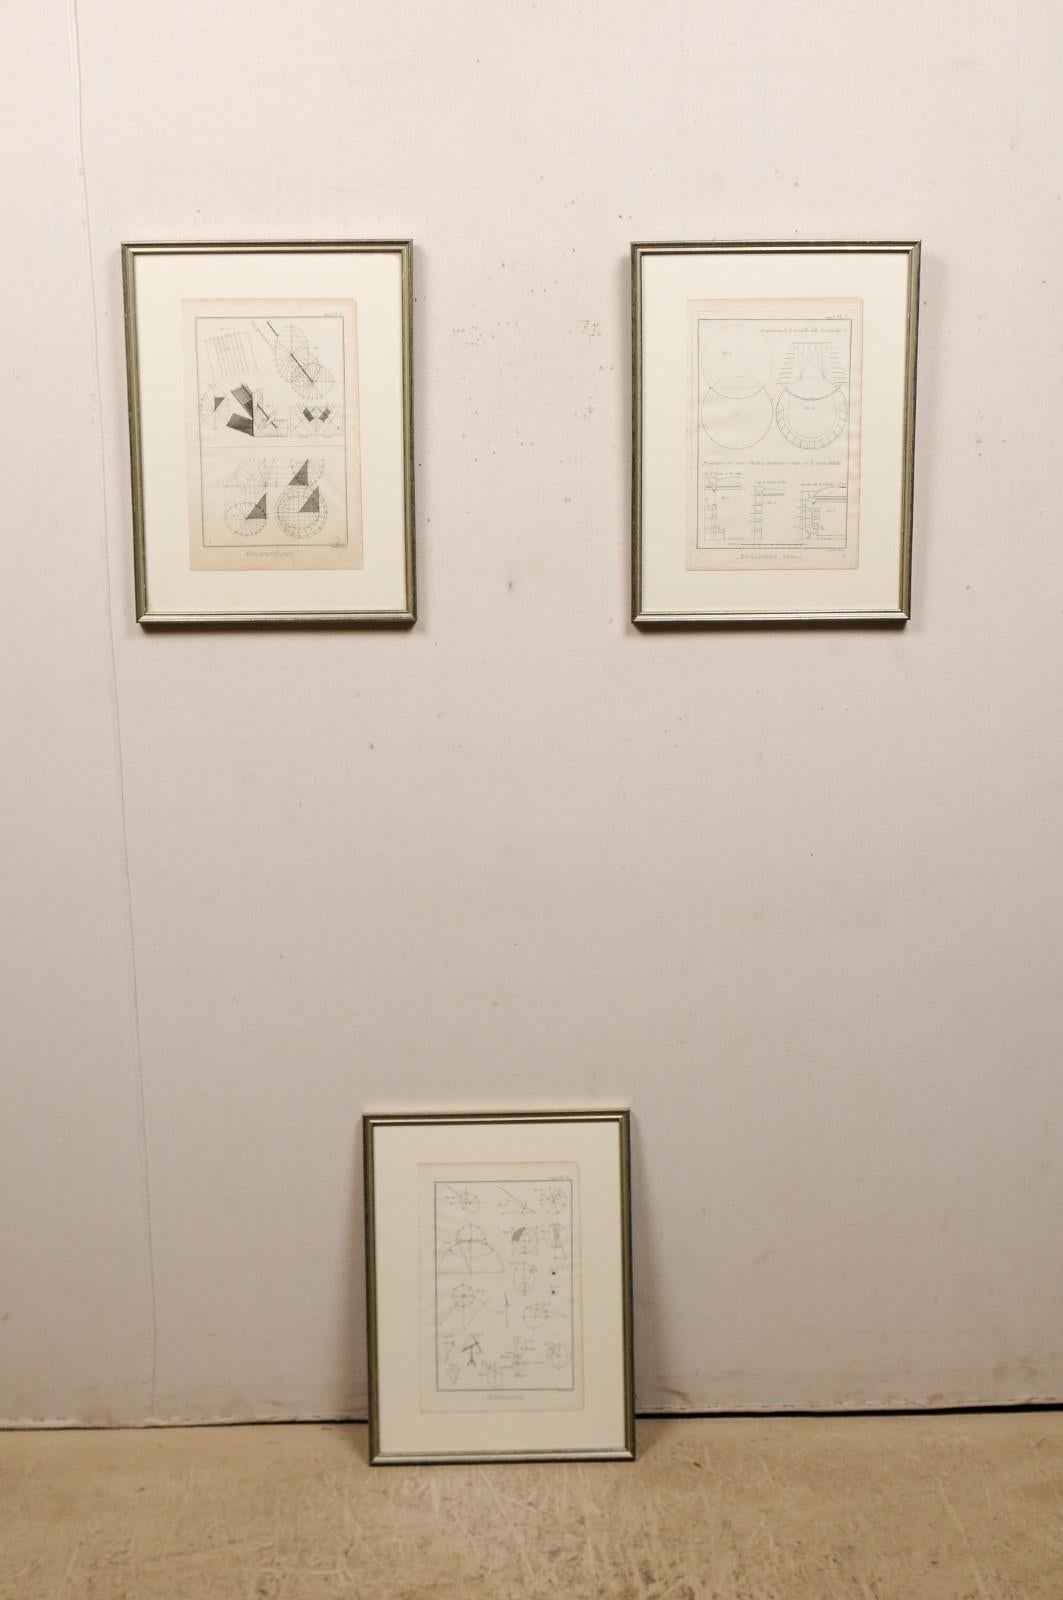 A collection of three framed French 18th century Bernard Direx renderings. This is a set comprised of framed architecture, astronomy and geometric renderings from French artist Bernard Direx. Each rendering was originally part of a larger book, and